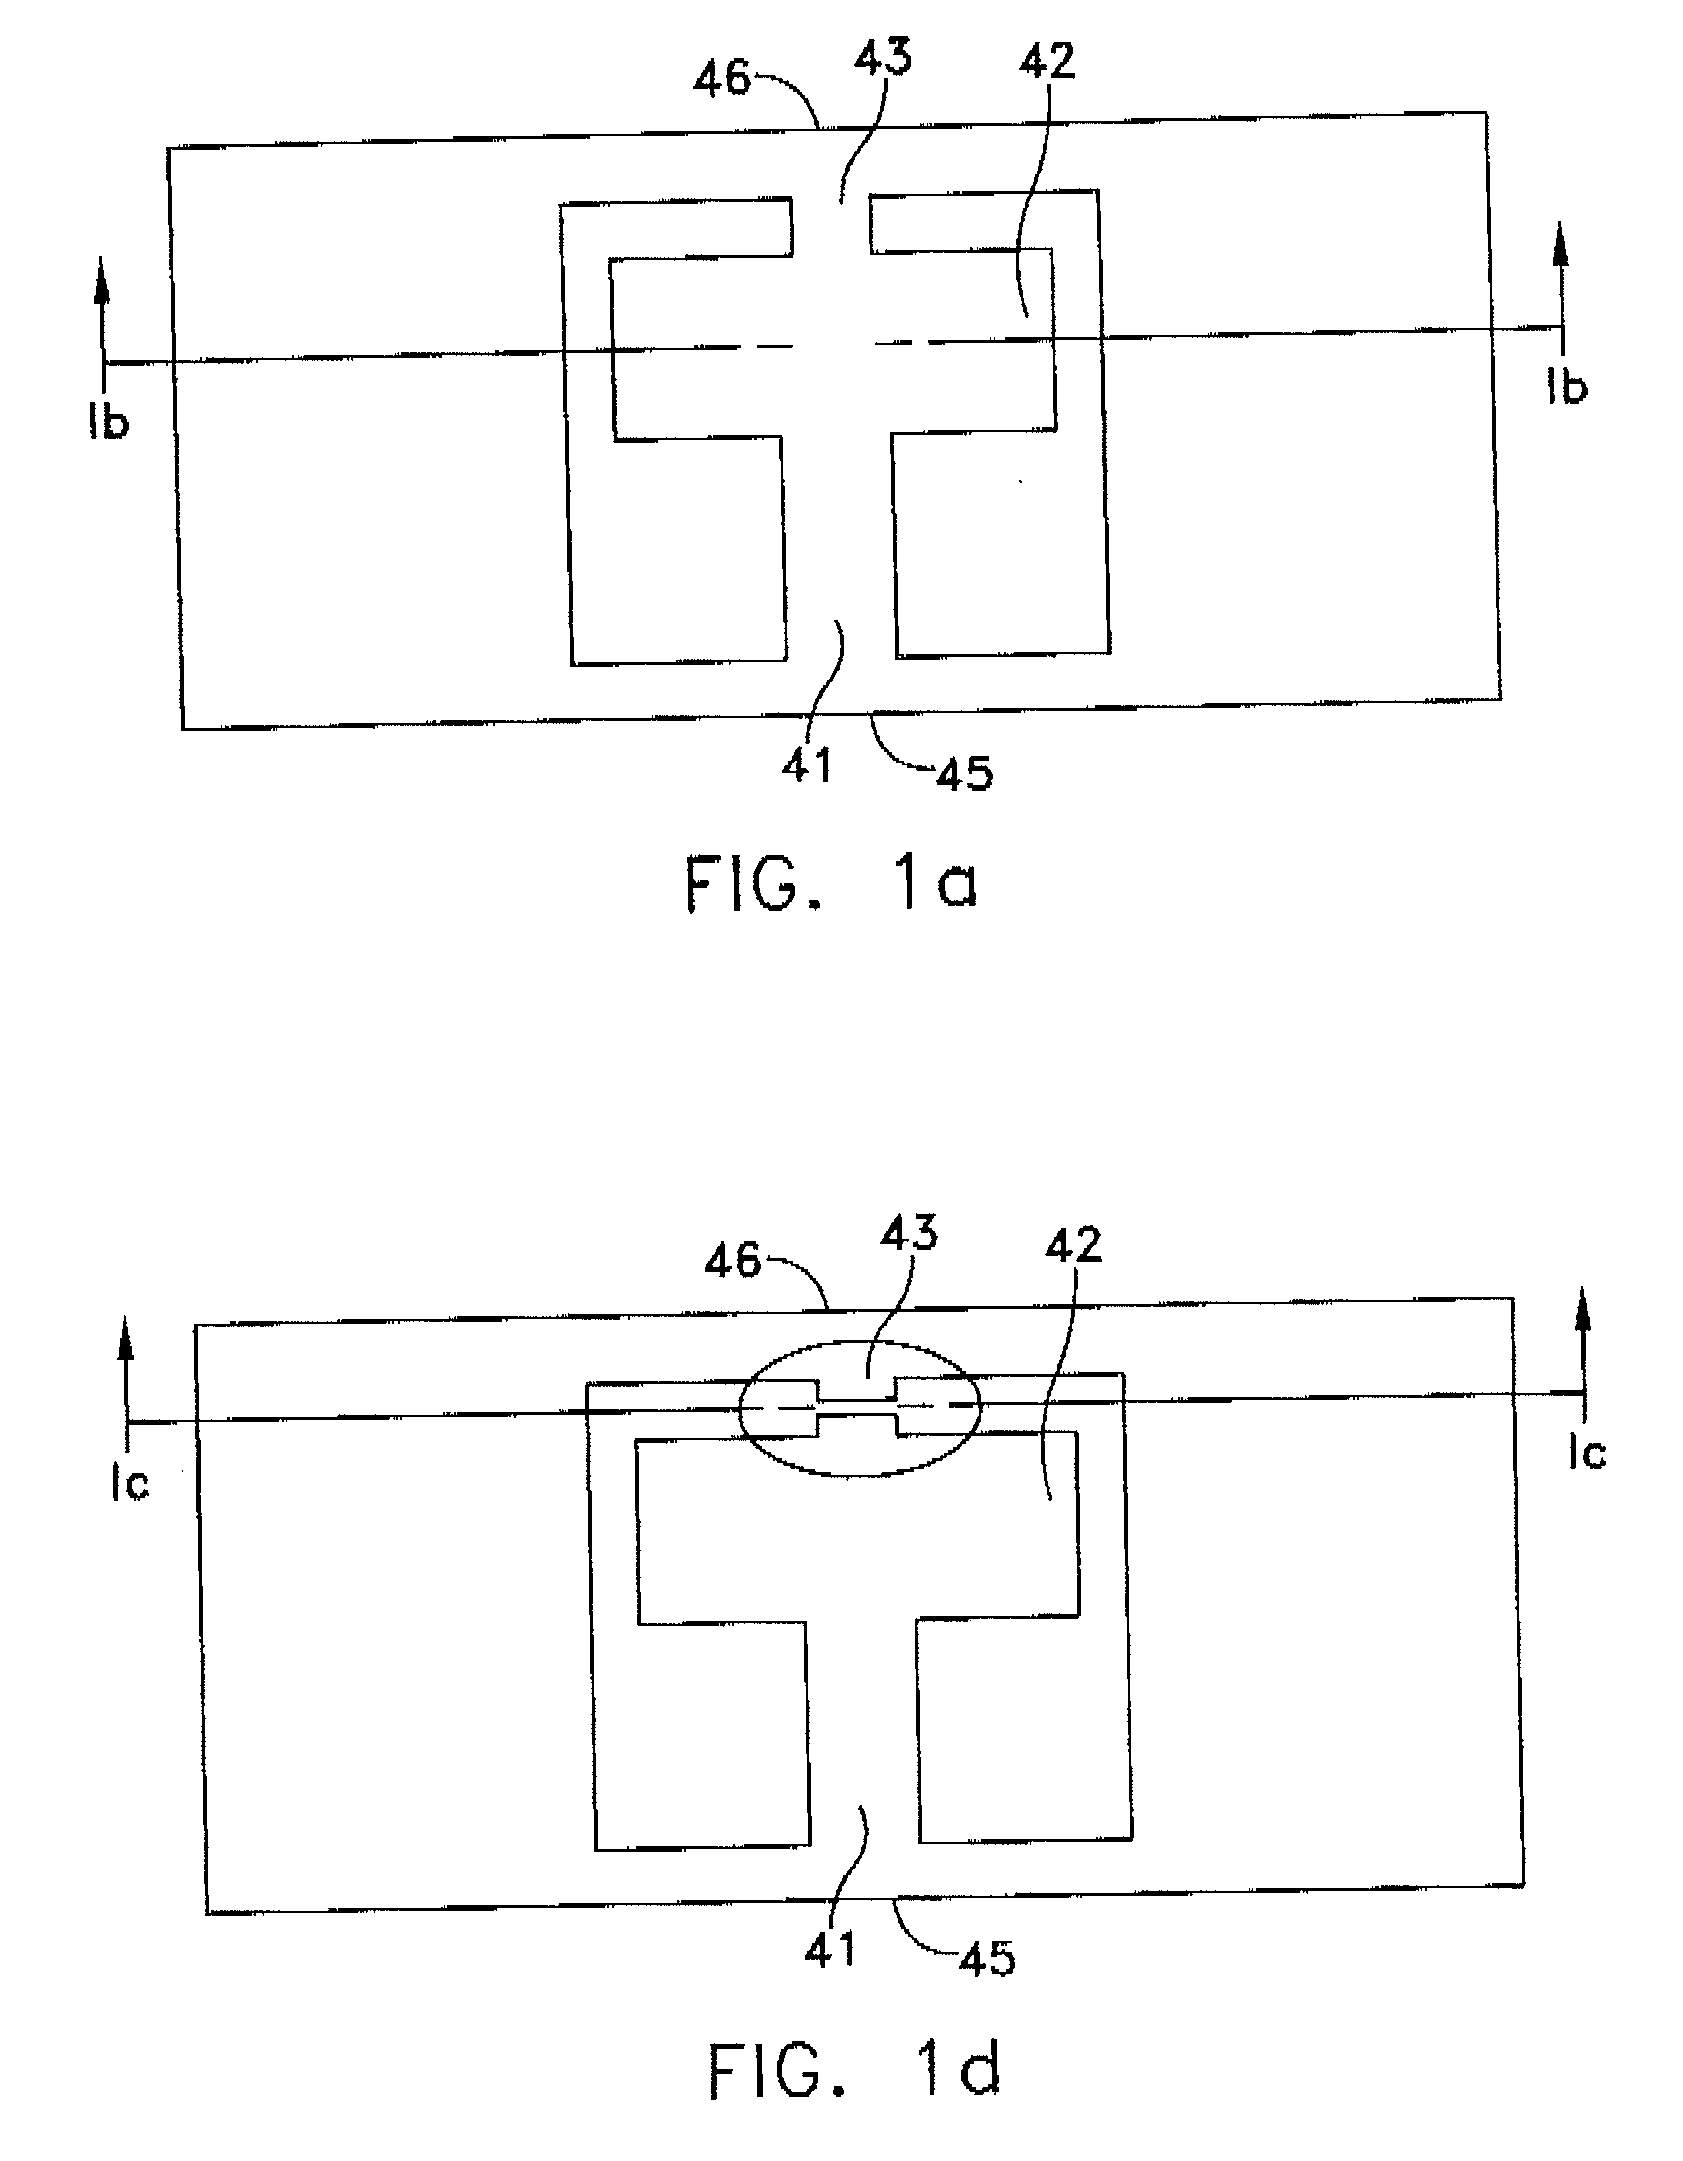 Polymide substrate bonded to other substrate